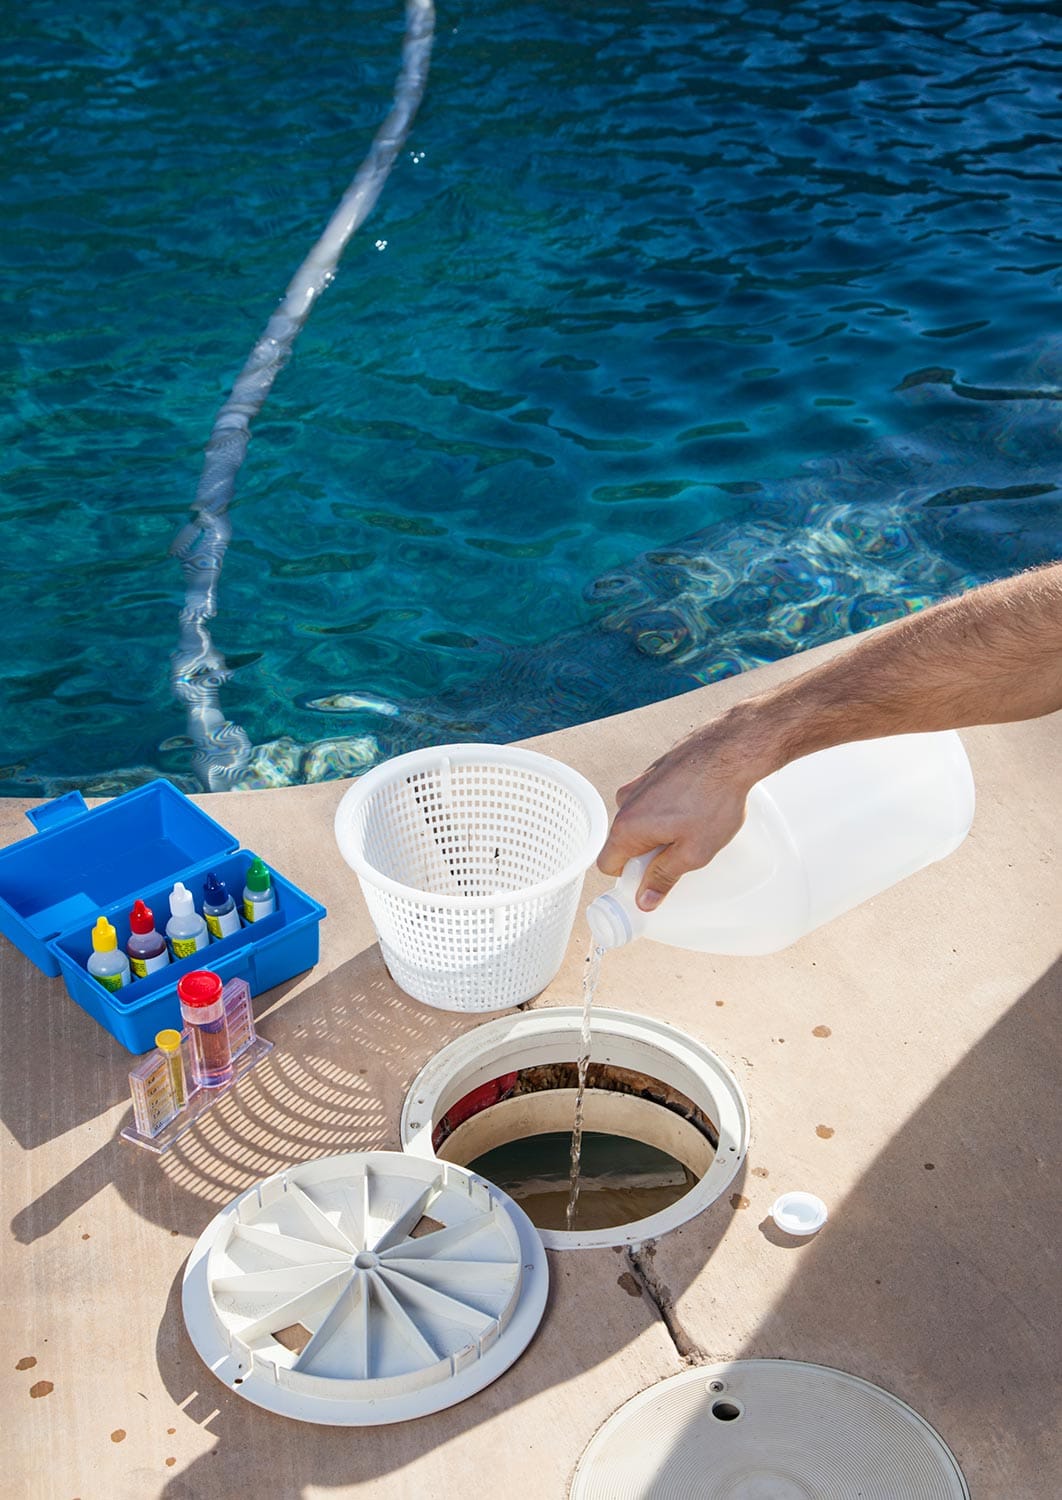 Adding chemicals to pool with testing kit